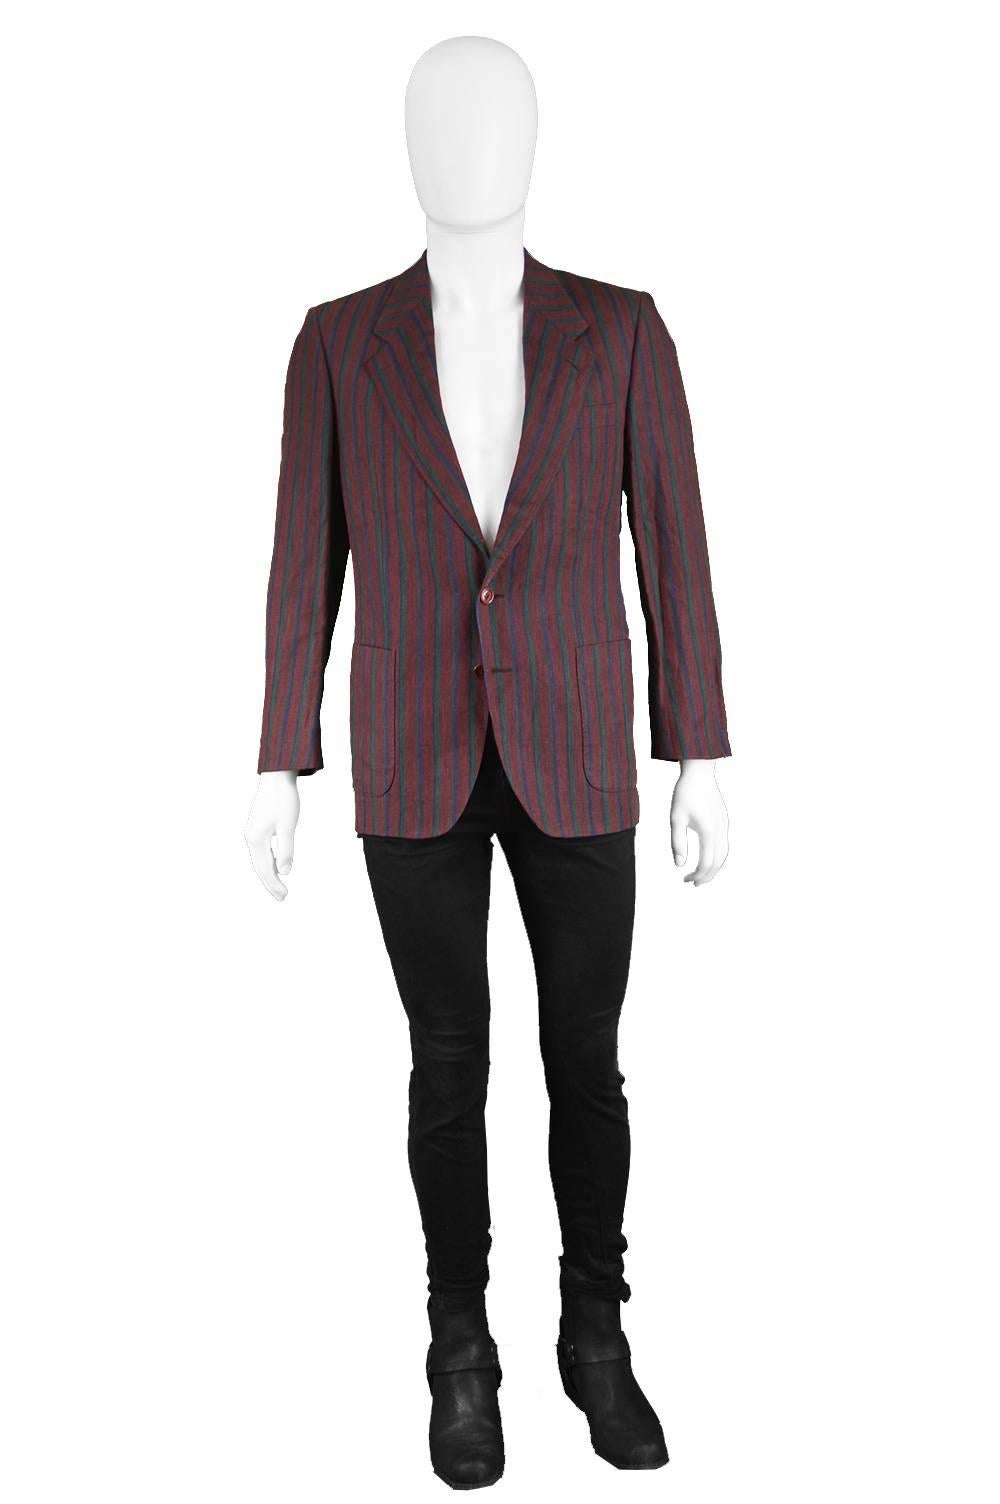 Tommy Nutter of Savile Row Rare Vintage 1980's Men's Regatta Striped Blazer

Size: Marked EU 46 which is roughly a men’s XS. Please check measurements.
Chest - 38” / 96cm (allow a couple of inches room for movement)
Waist - 34” / 86cm
Length